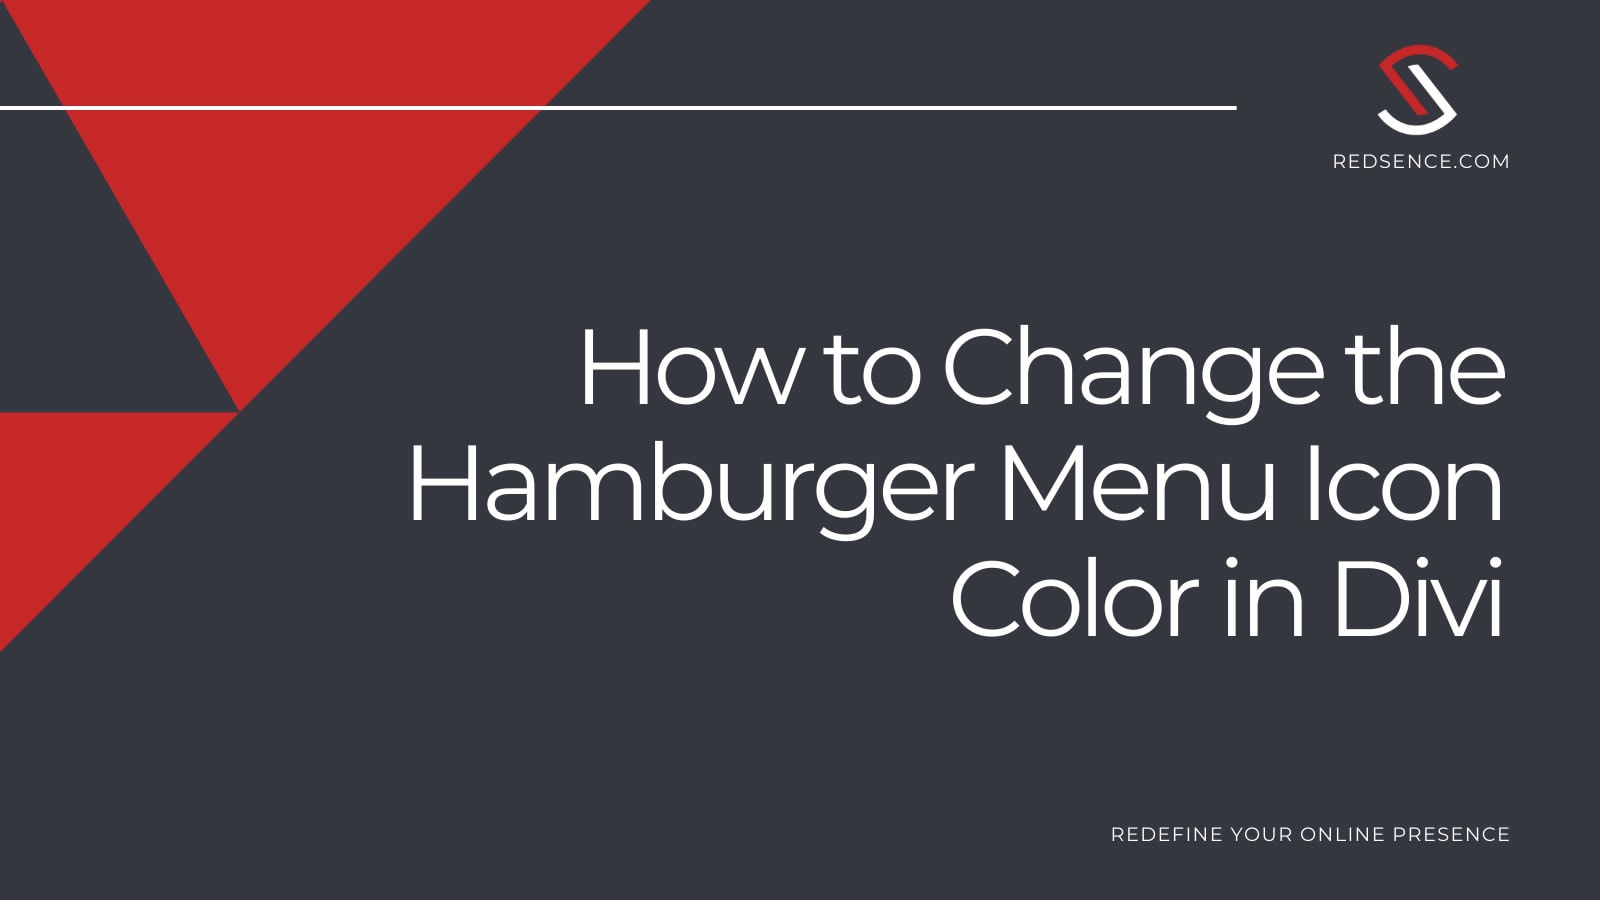 How to Change the Hamburger Menu Icon Color in Divi